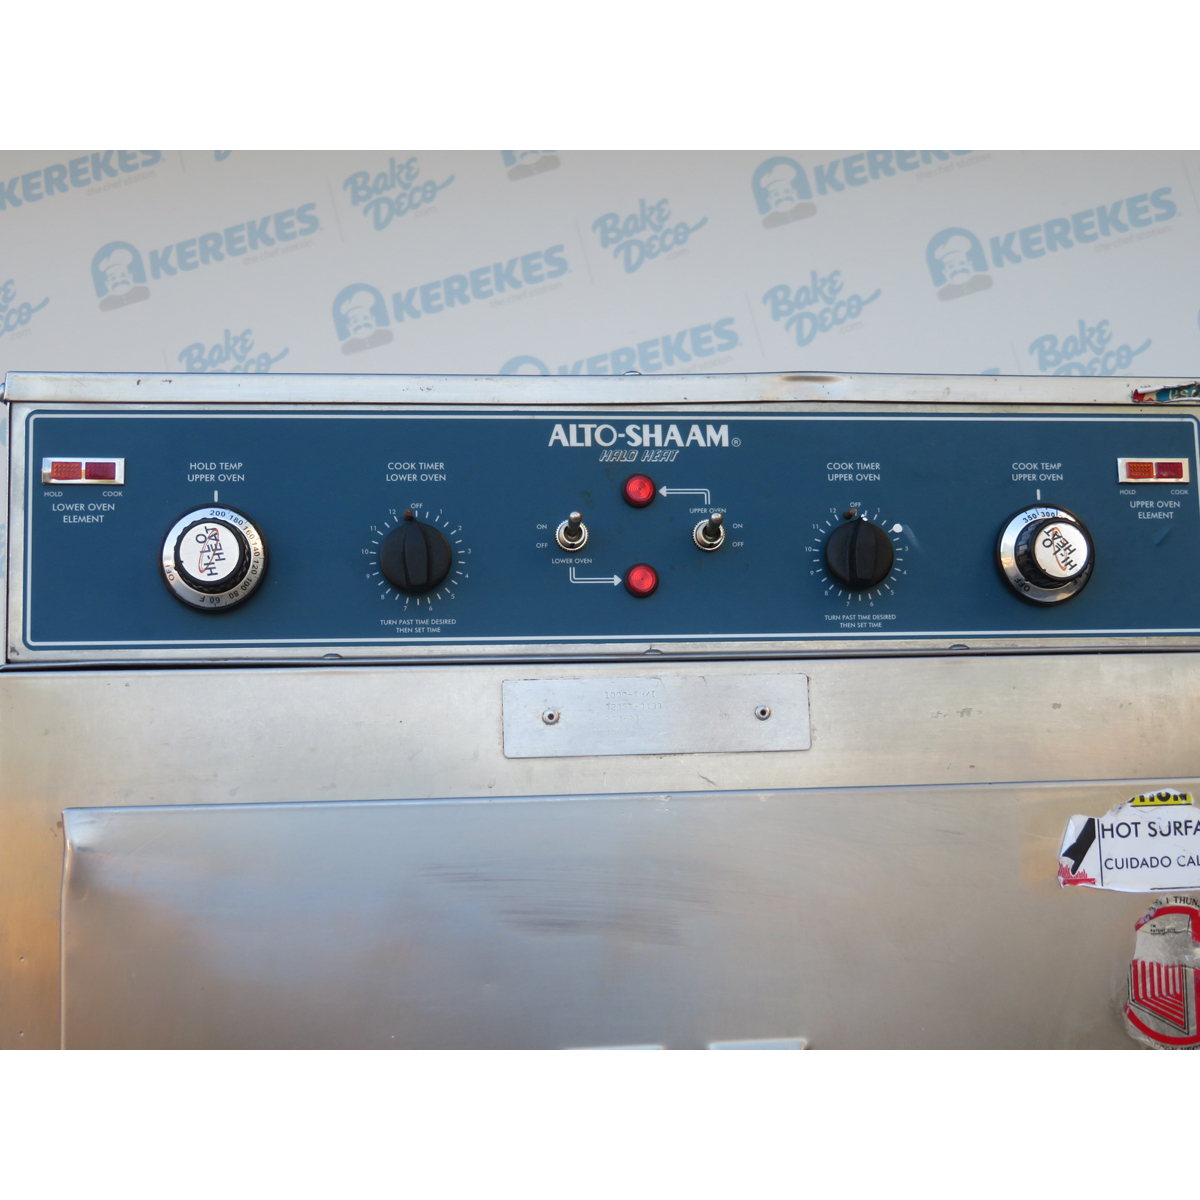 Alto Shaam 1000-TH-I Cook & Hold Oven, Used Good Condition image 1